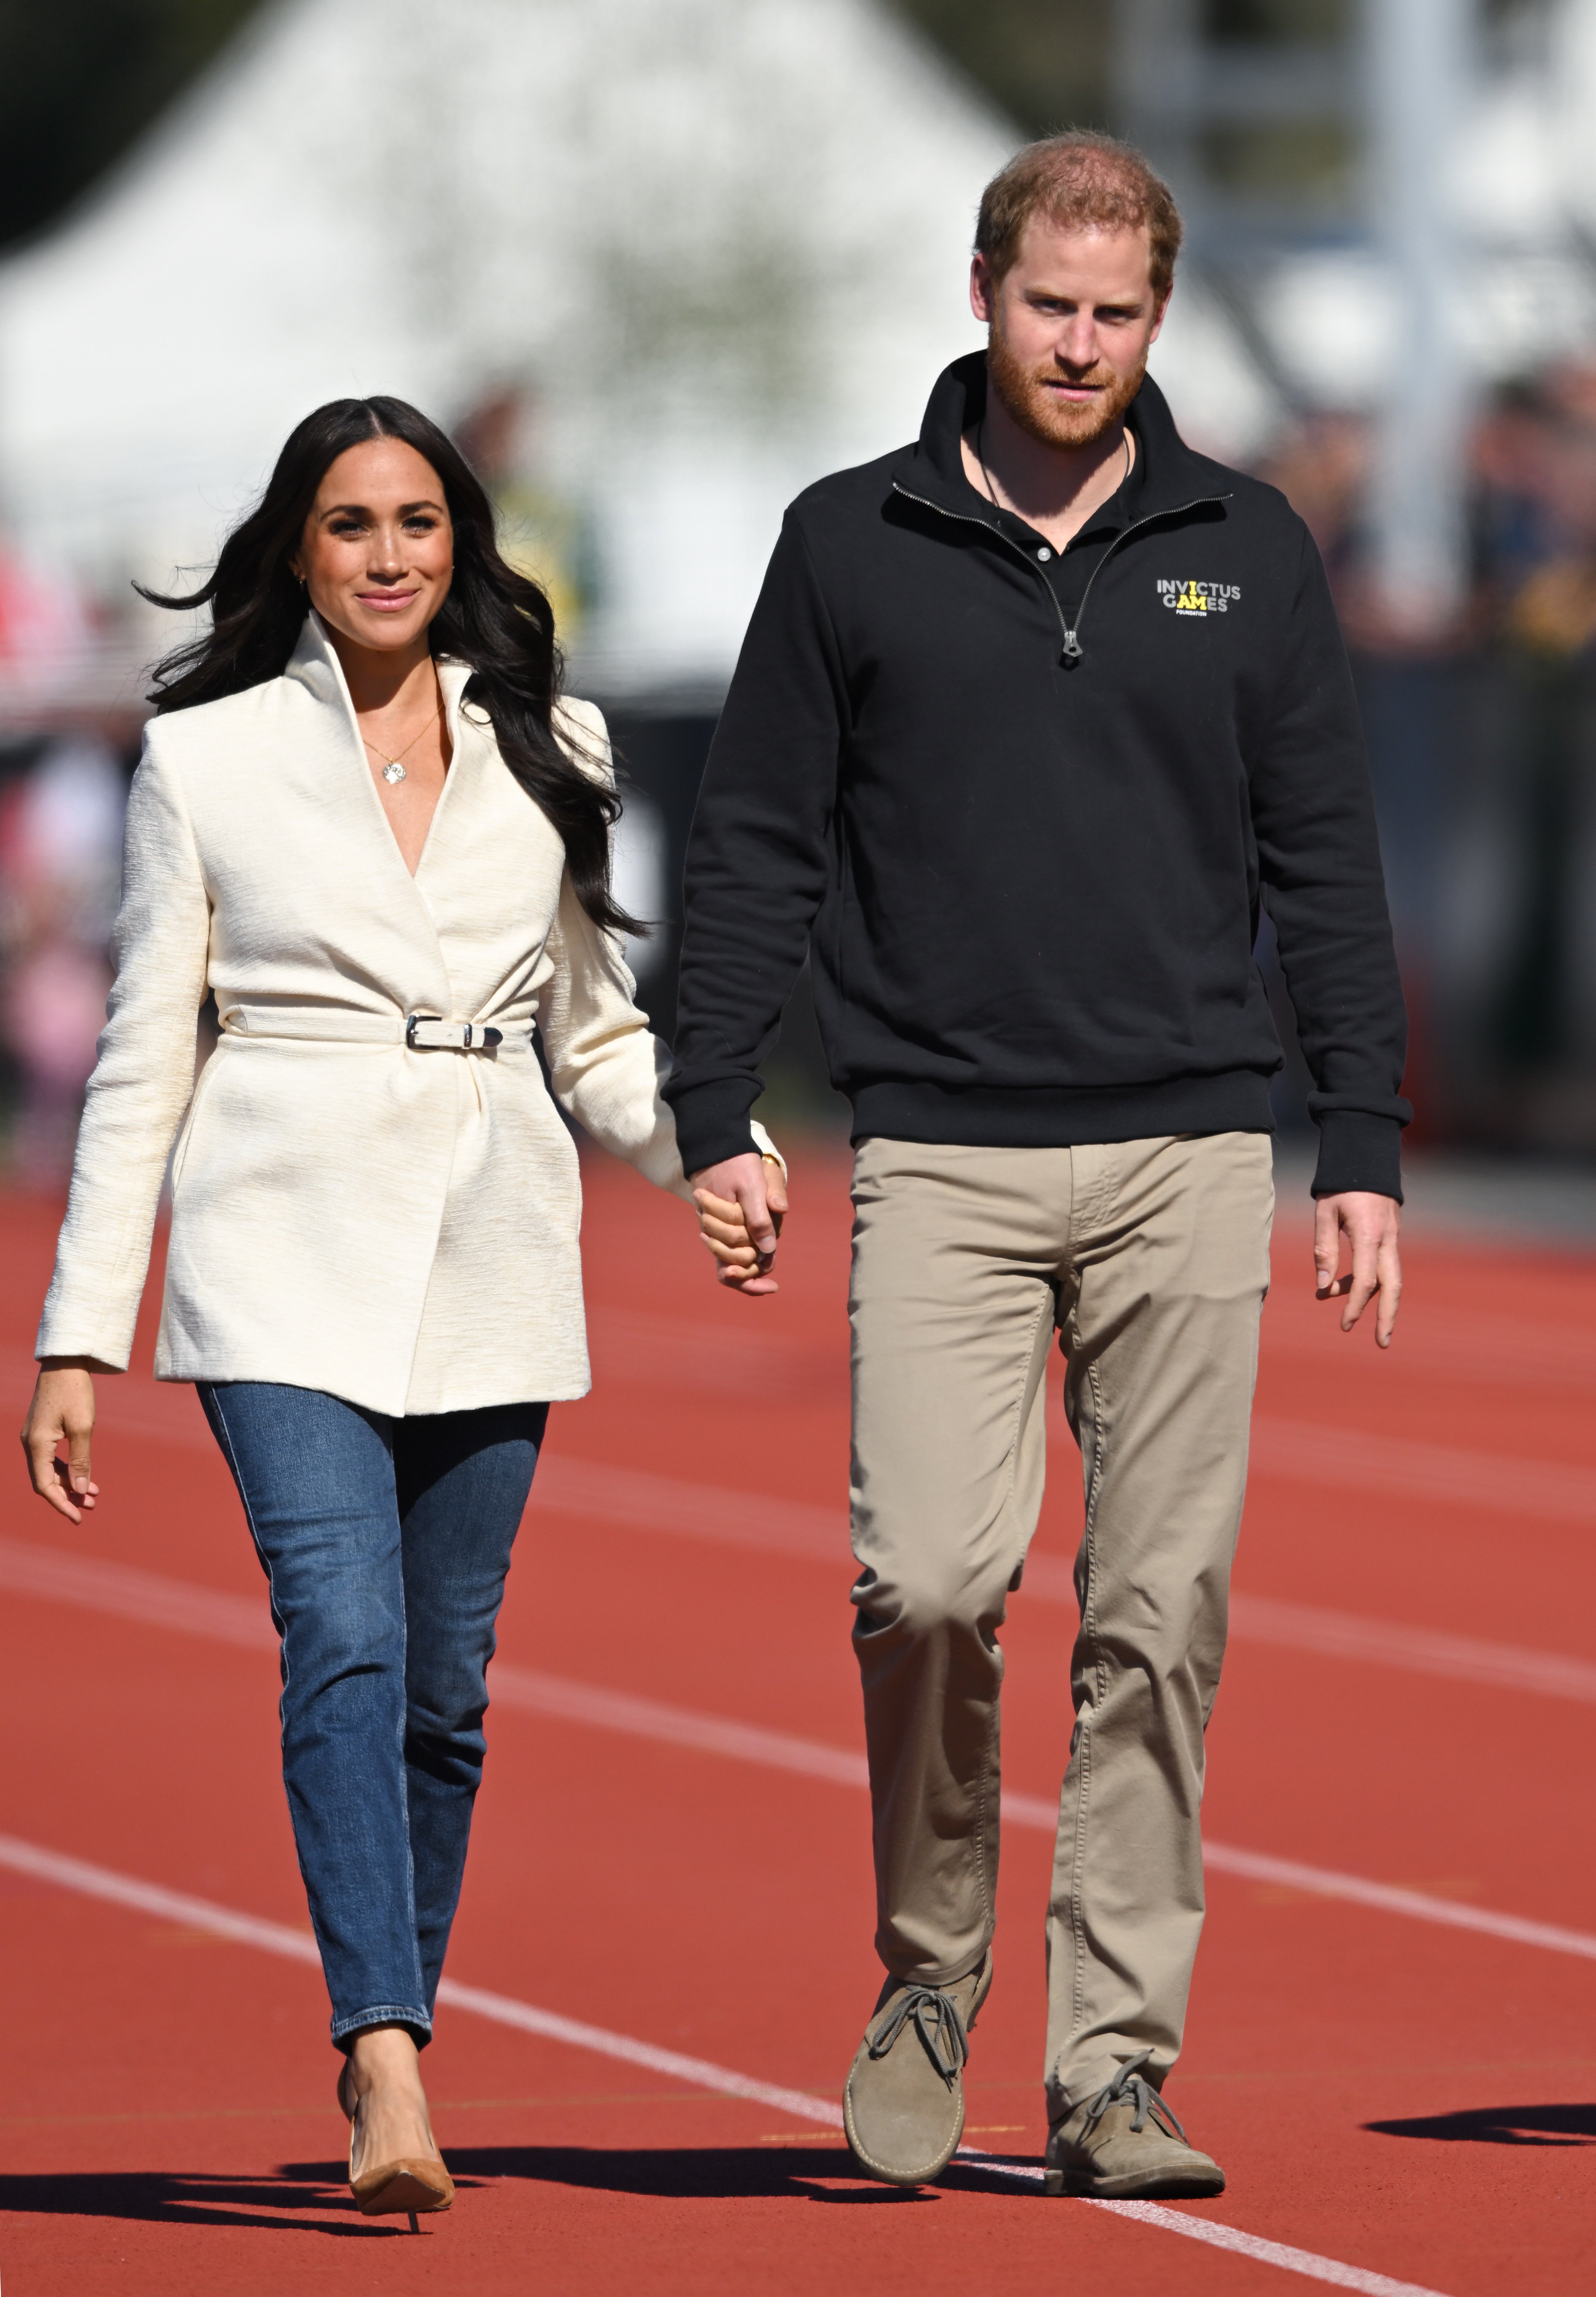 Duchess Meghan and Prince Harry during the Invictus Games at Zuiderpark on April 17, 2022, in The Hague, Netherlands. | Source: Getty Images